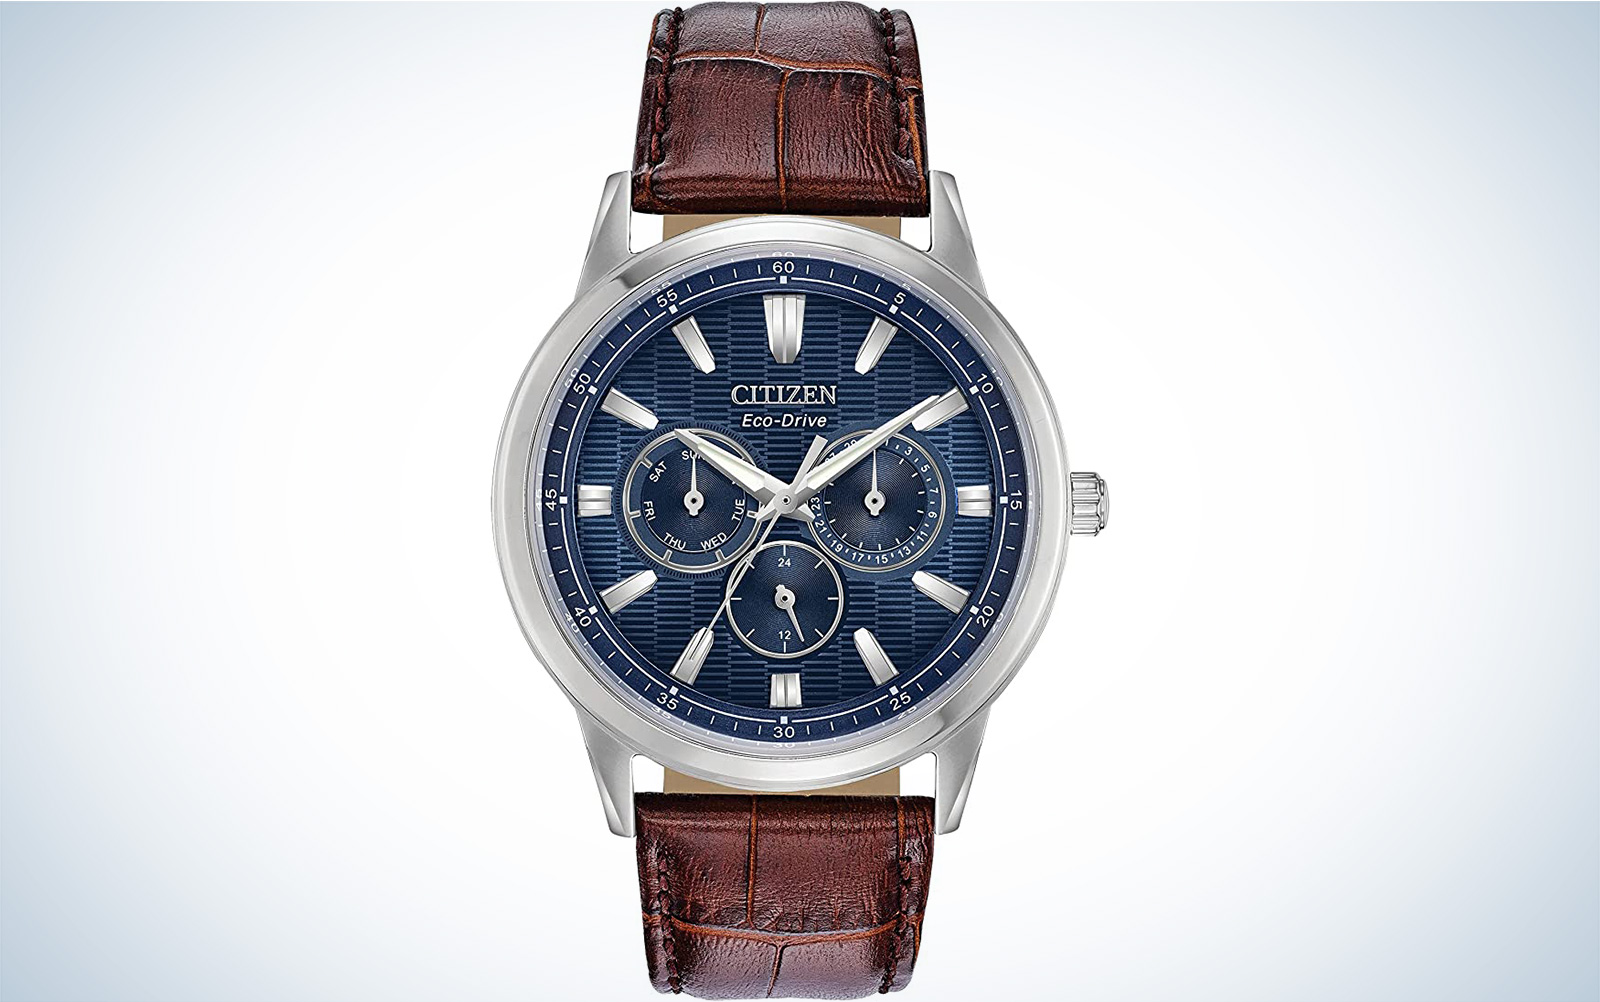 Citizen Men's Eco-Drive Corso Classic Watch in Stainless Steel with Brown Leather strap